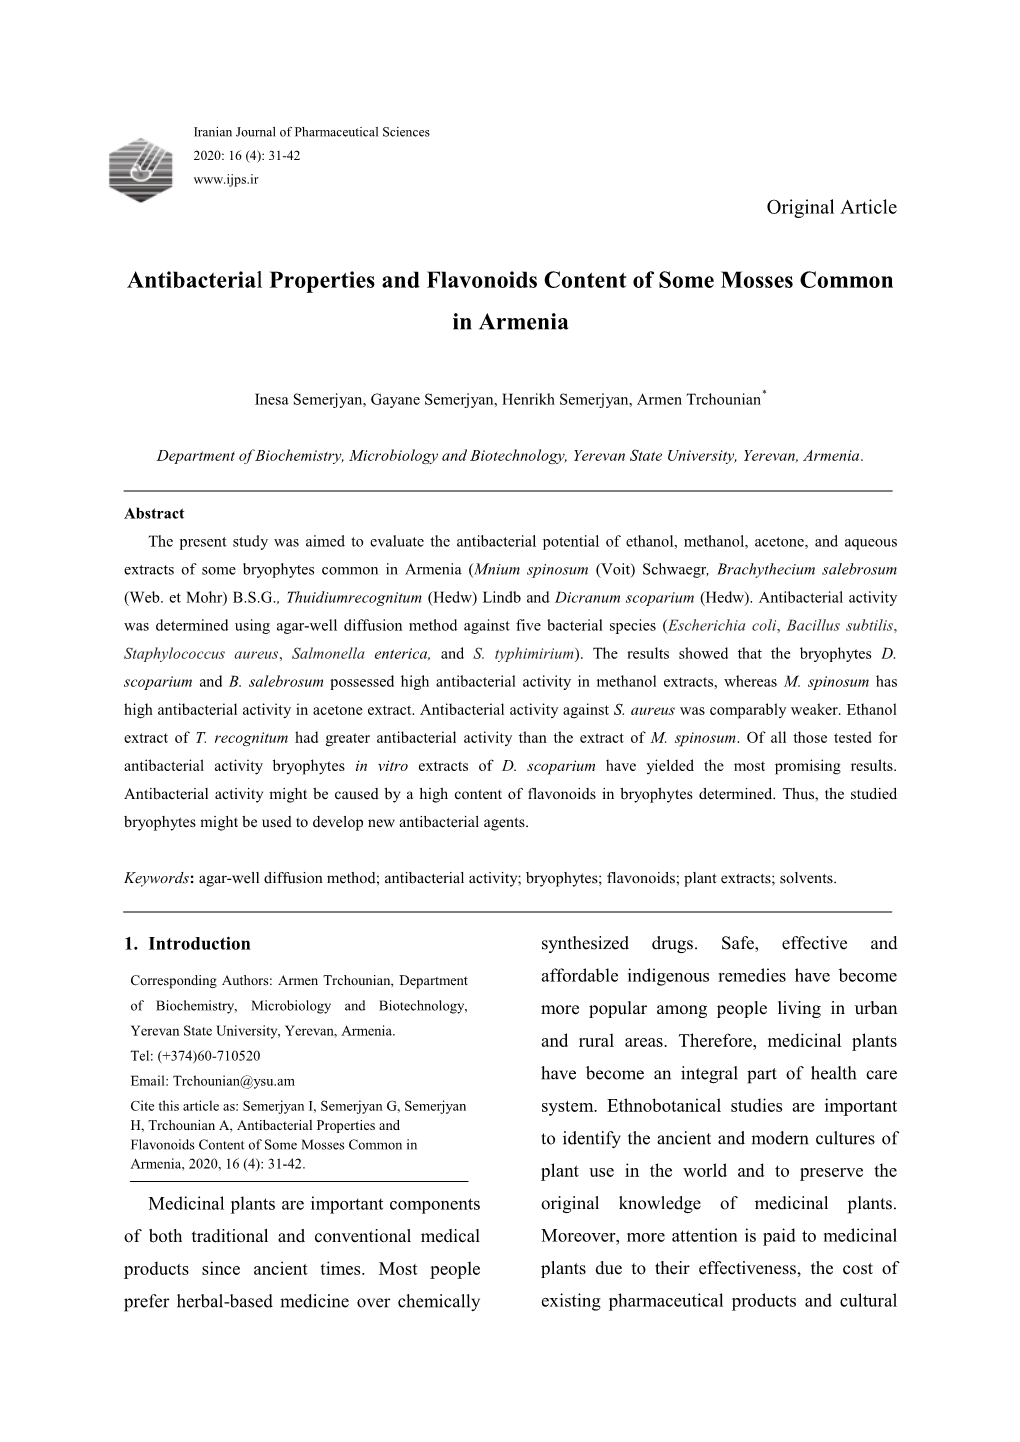 Antibacterial Properties and Flavonoids Content of Some Mosses Common in Armenia